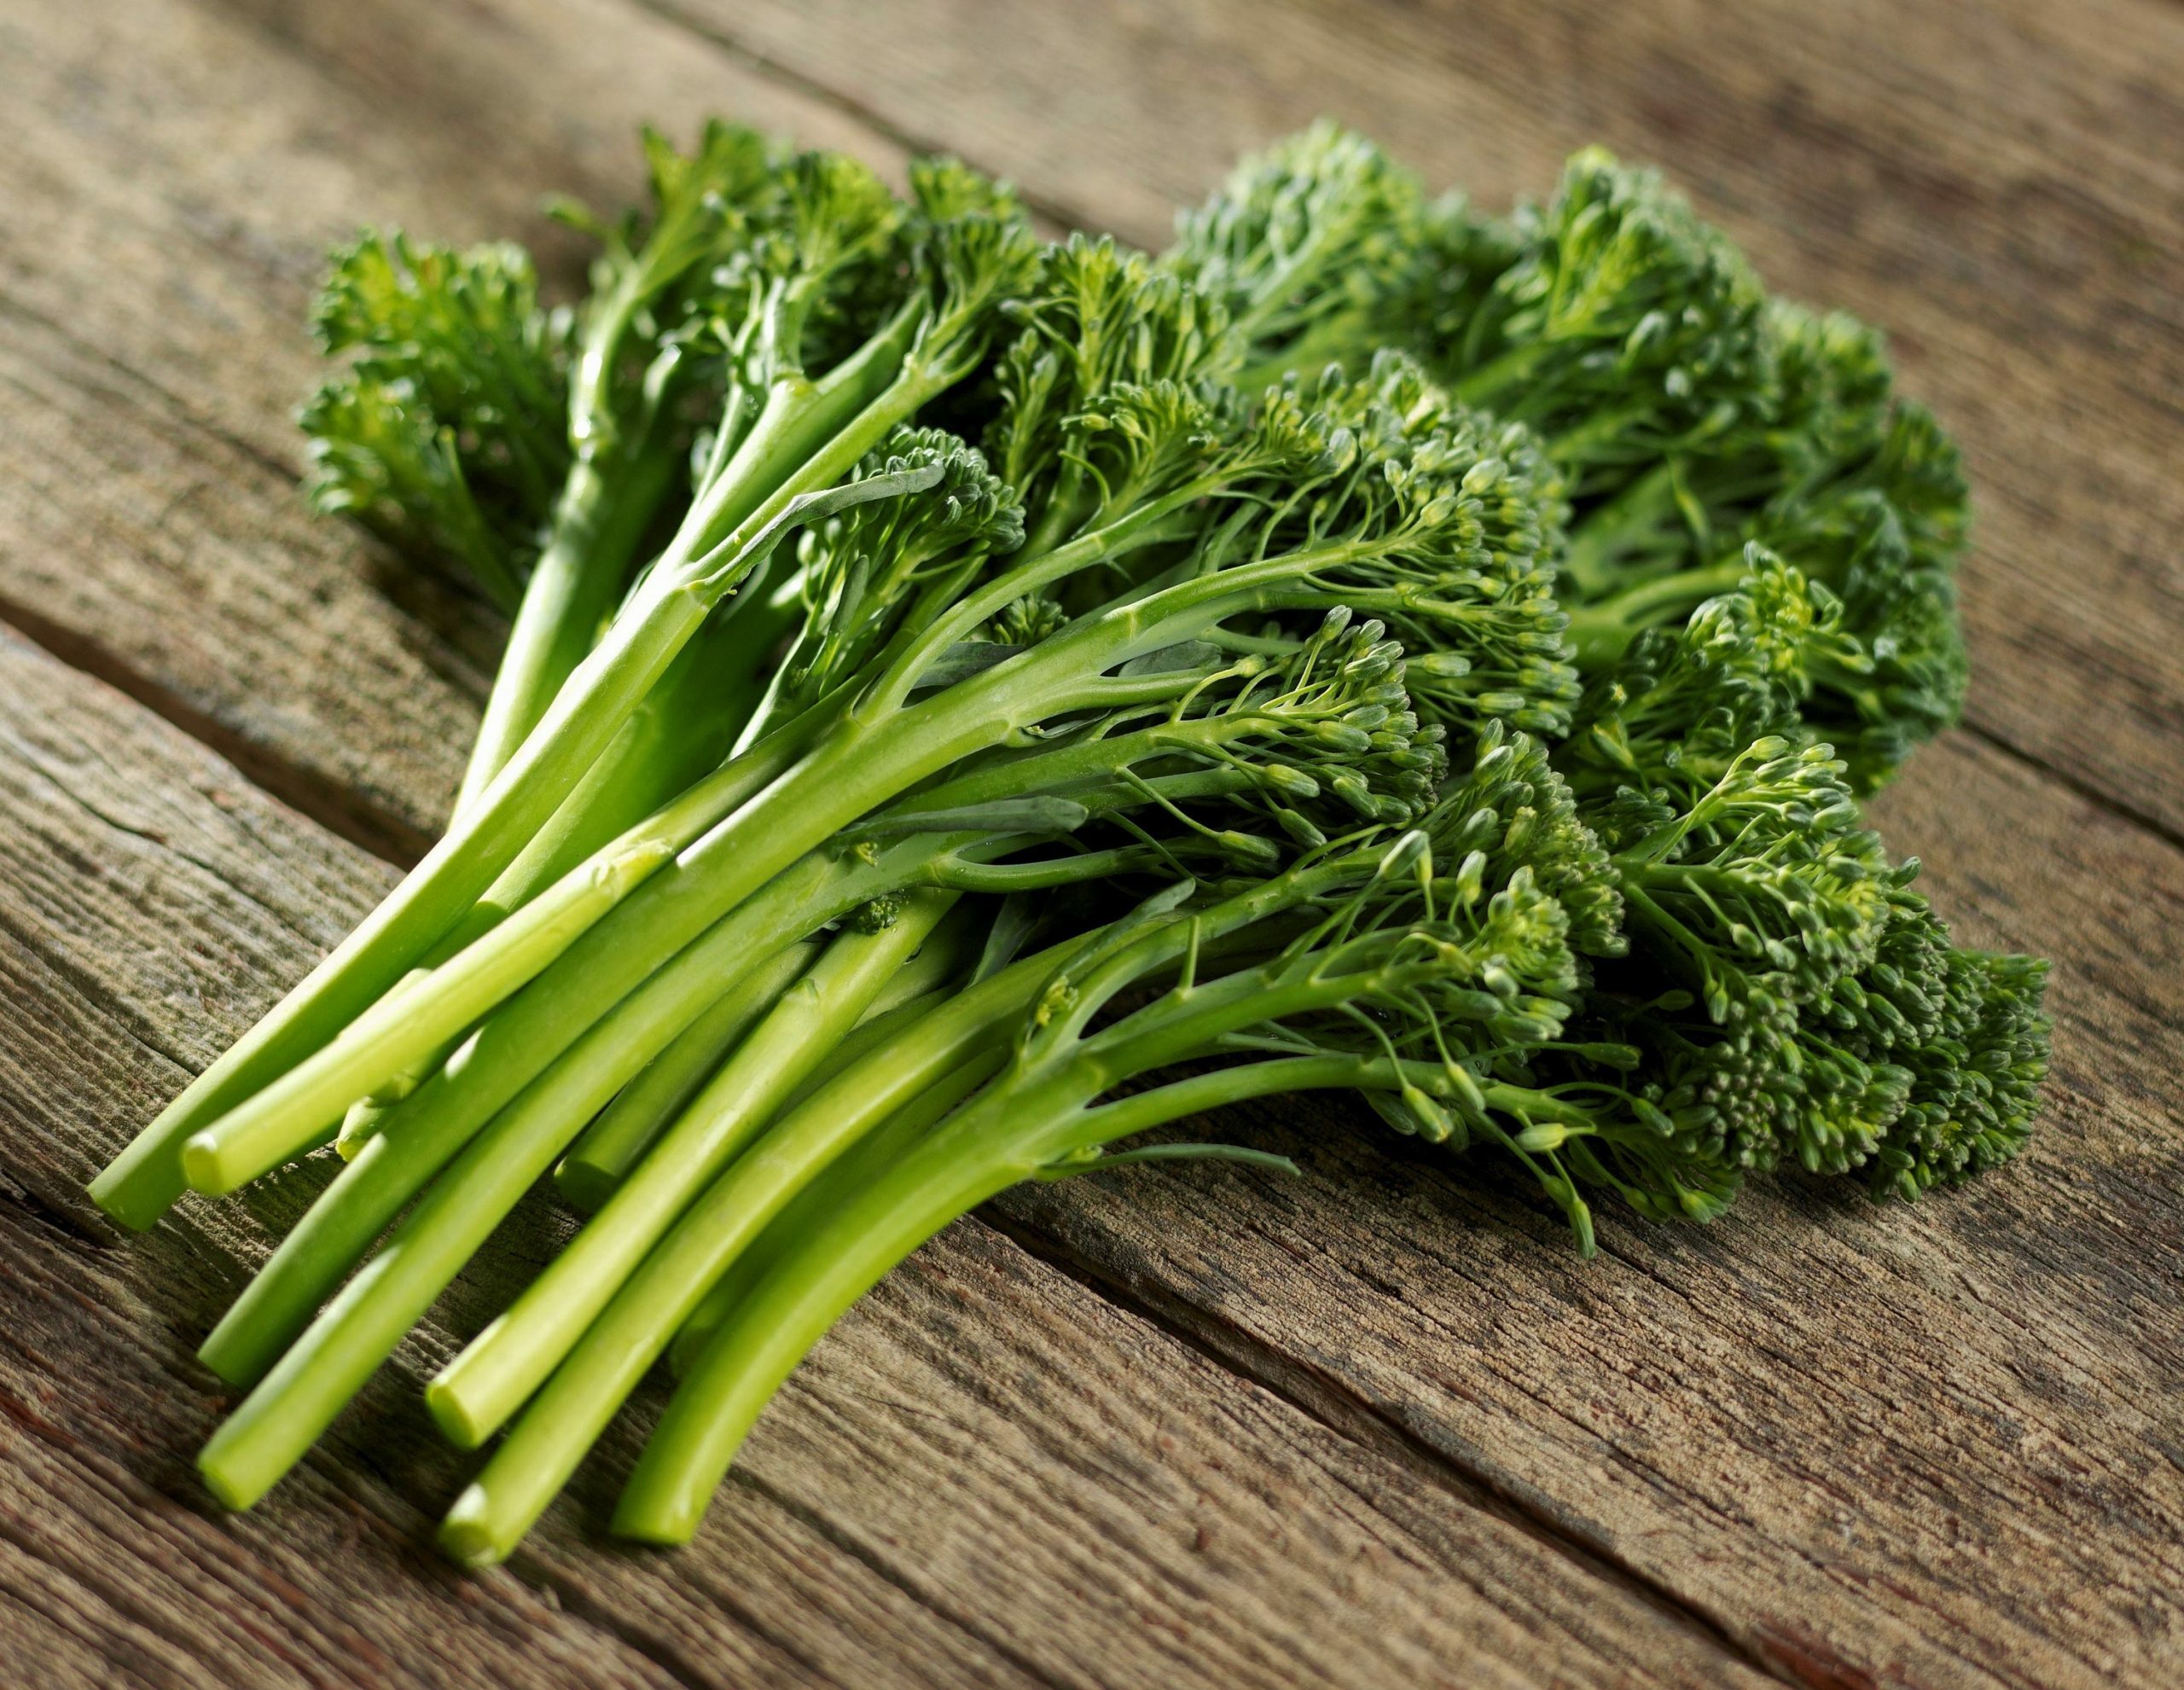 Aspabroc is a broccolini developed 20 years ago and is a cross between Italian Sprouting broccoli and Chinese kale. It has an asparagus look and the stem and florets are edible with a peppery-sweet flavor. This variety is also well suited to container and pot growing.    PARK SEED